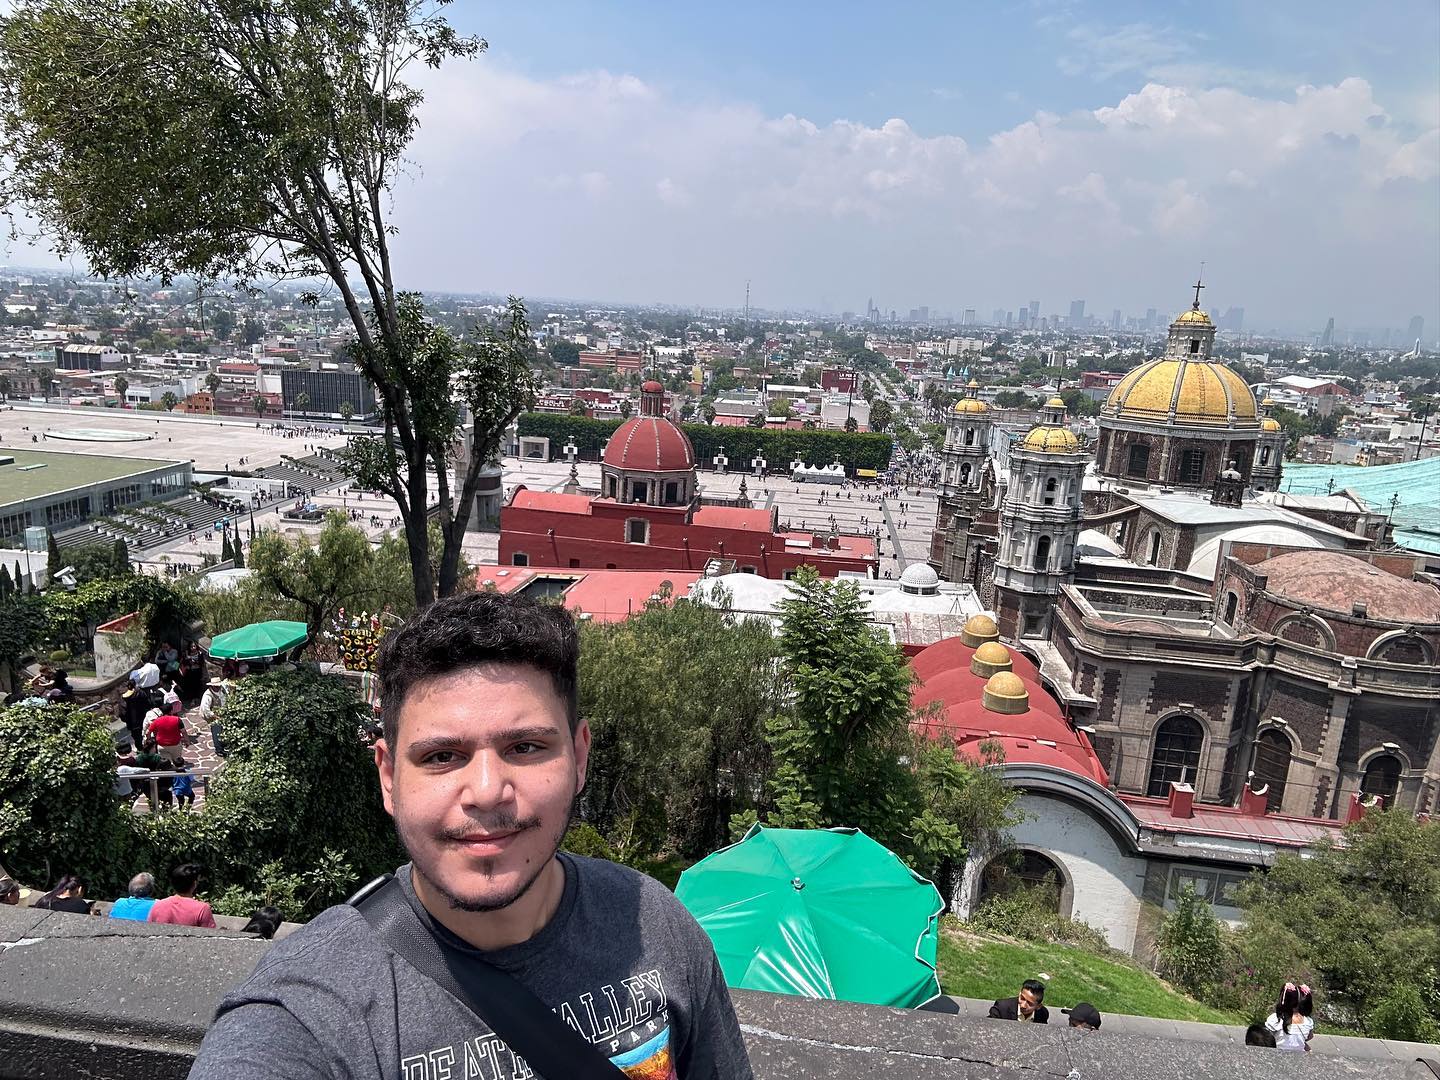 Some days in Mexico City